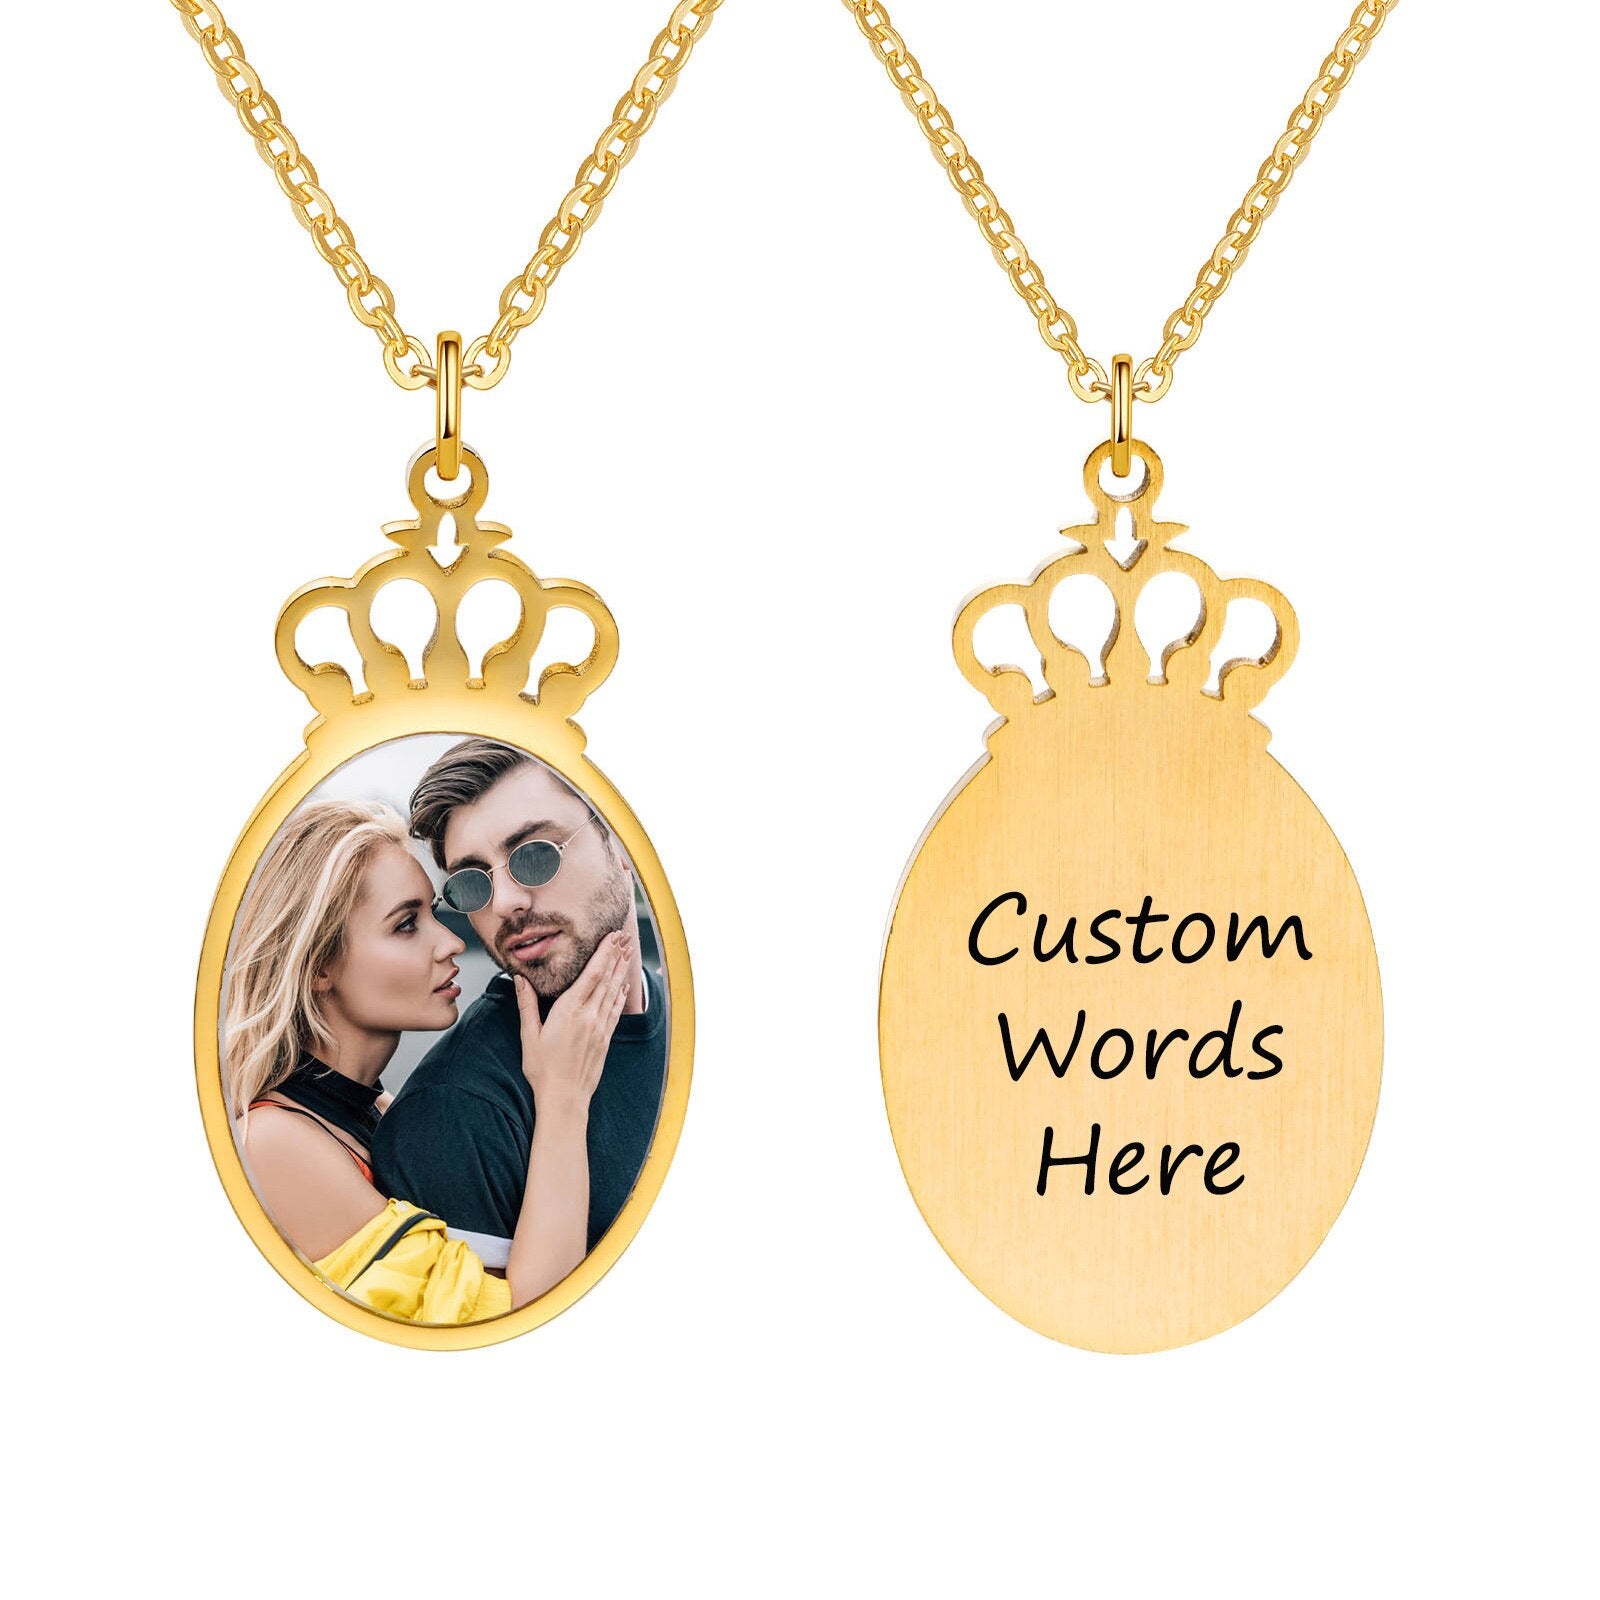 Vnox Free Personalize Photo Crown Necklaces for Women,Custom Picture Image Words Info, Stainless Steel Pendant Collar Gift - Charlie Dolly